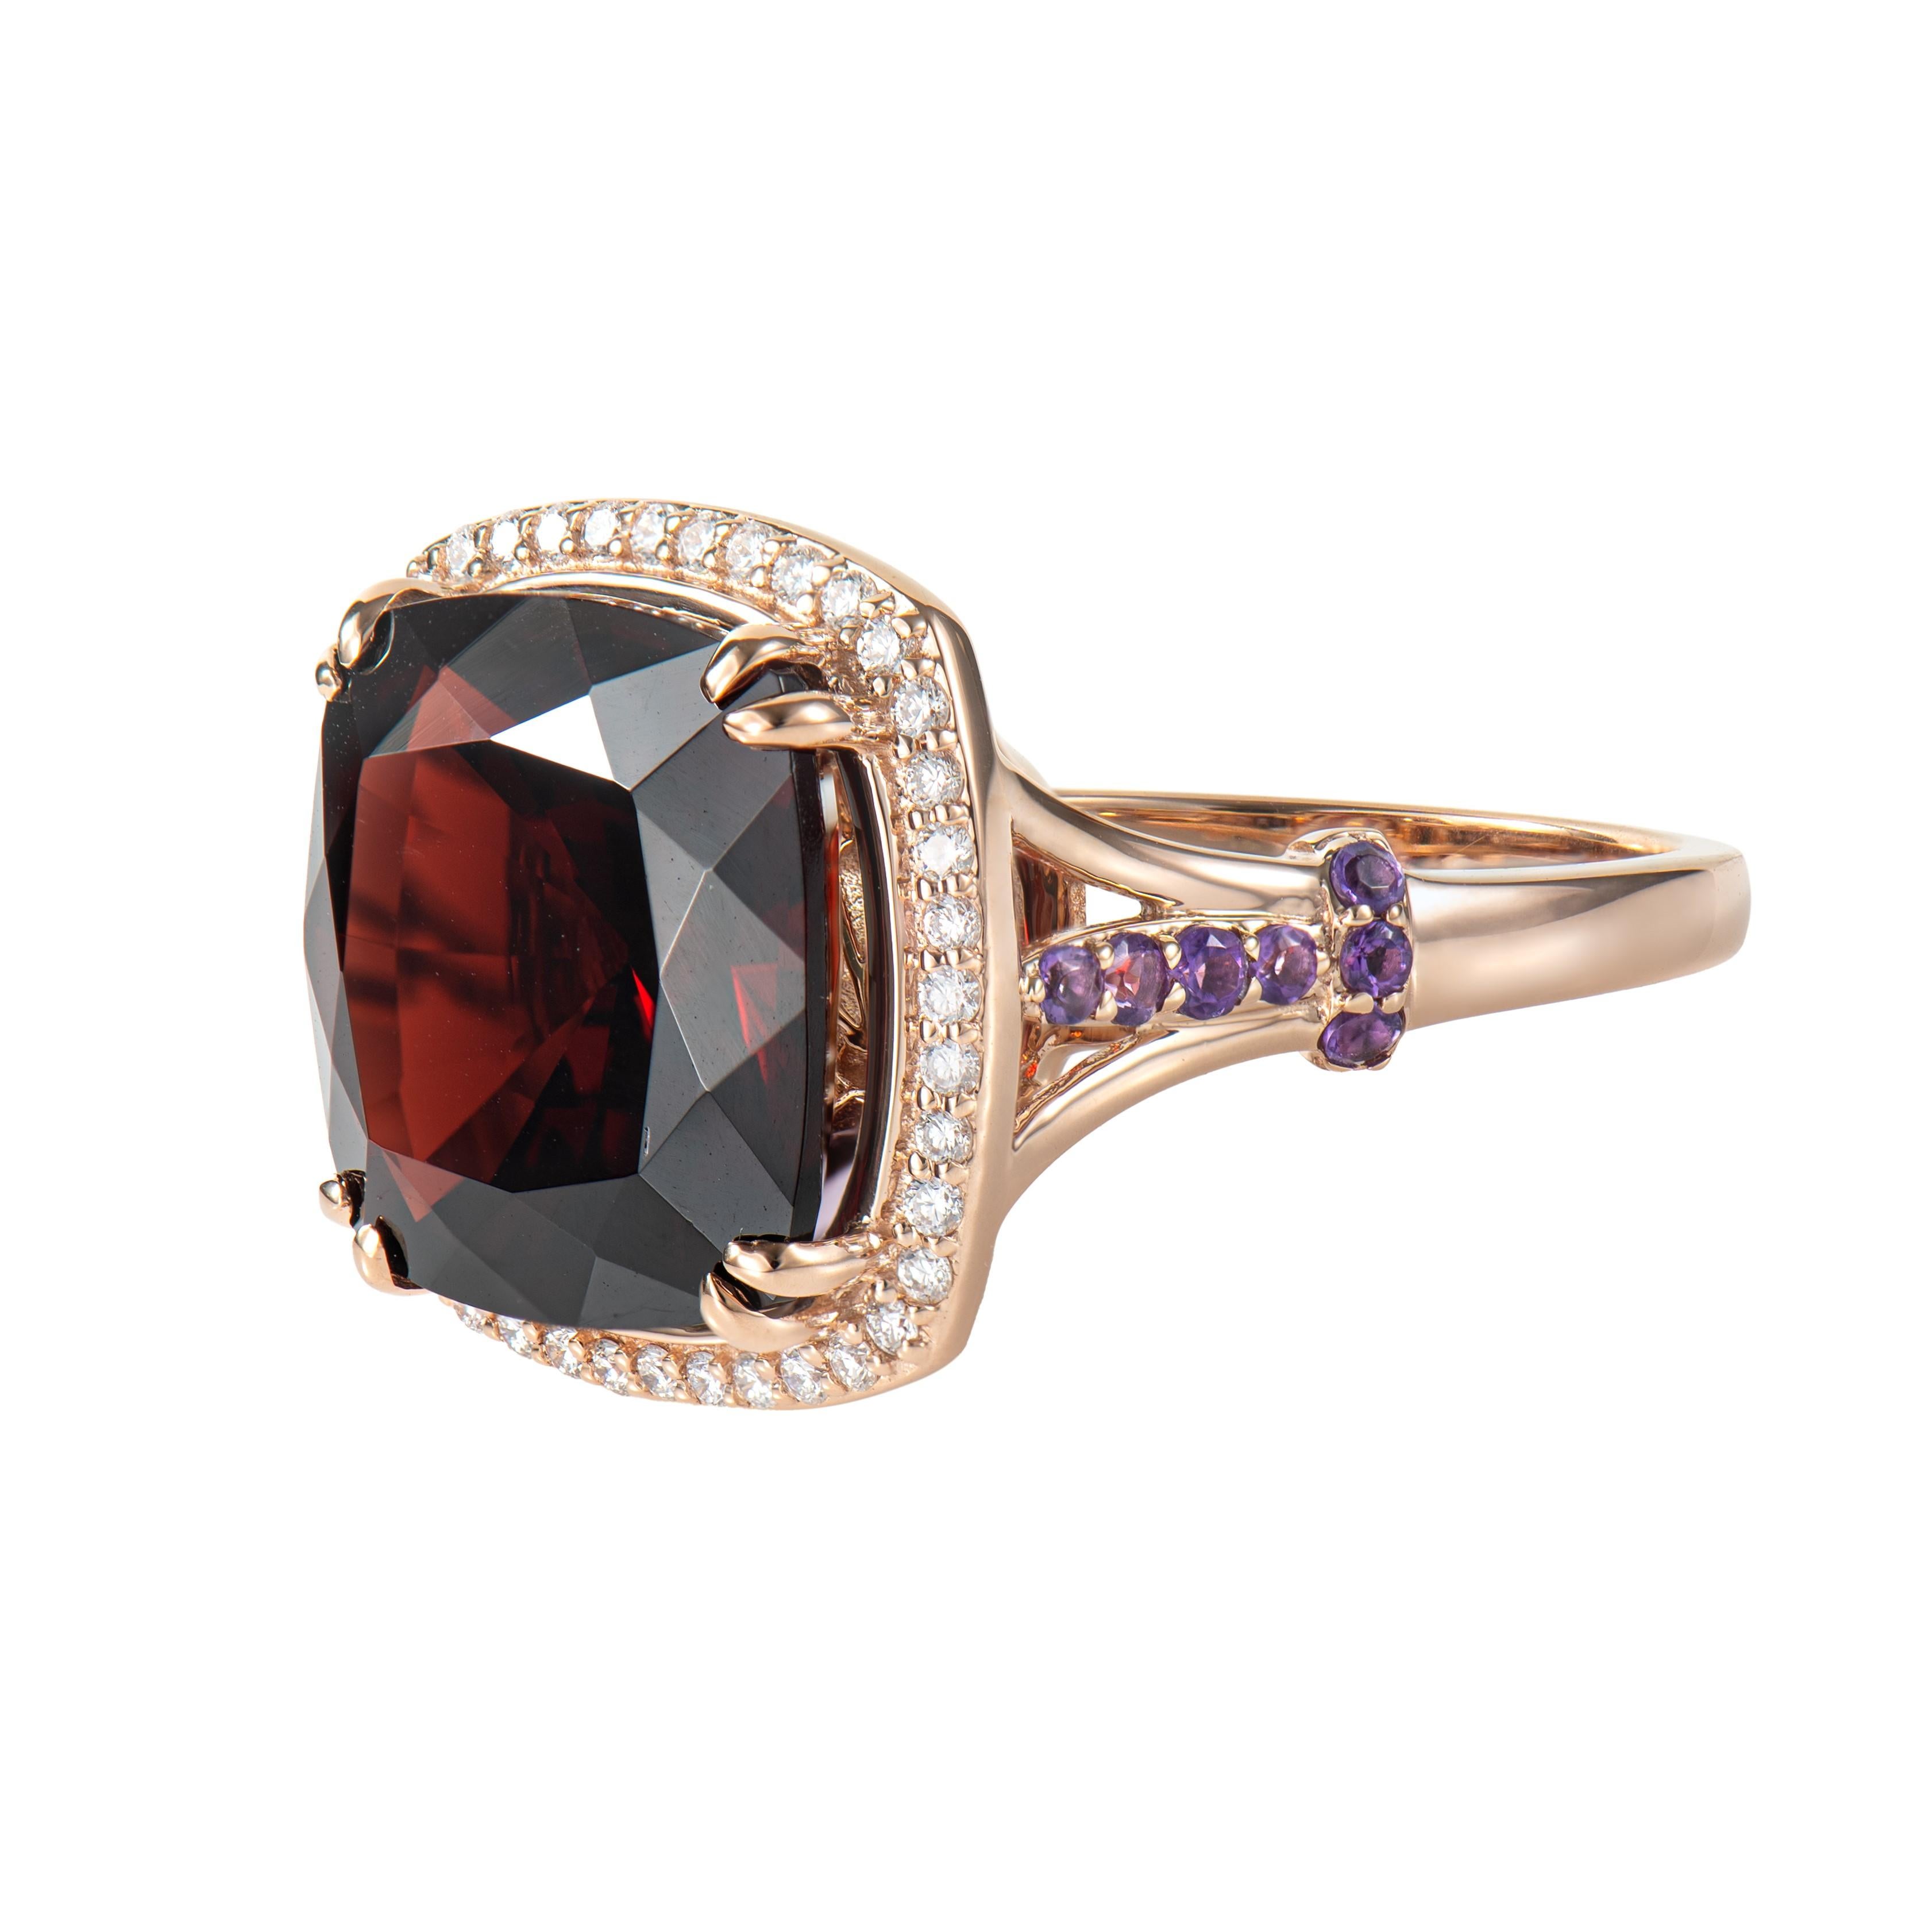 Cushion Cut 13.99 Carat Garnet Cocktail Ring in 18Karat Rose Gold with Amethyst and Diamond. For Sale